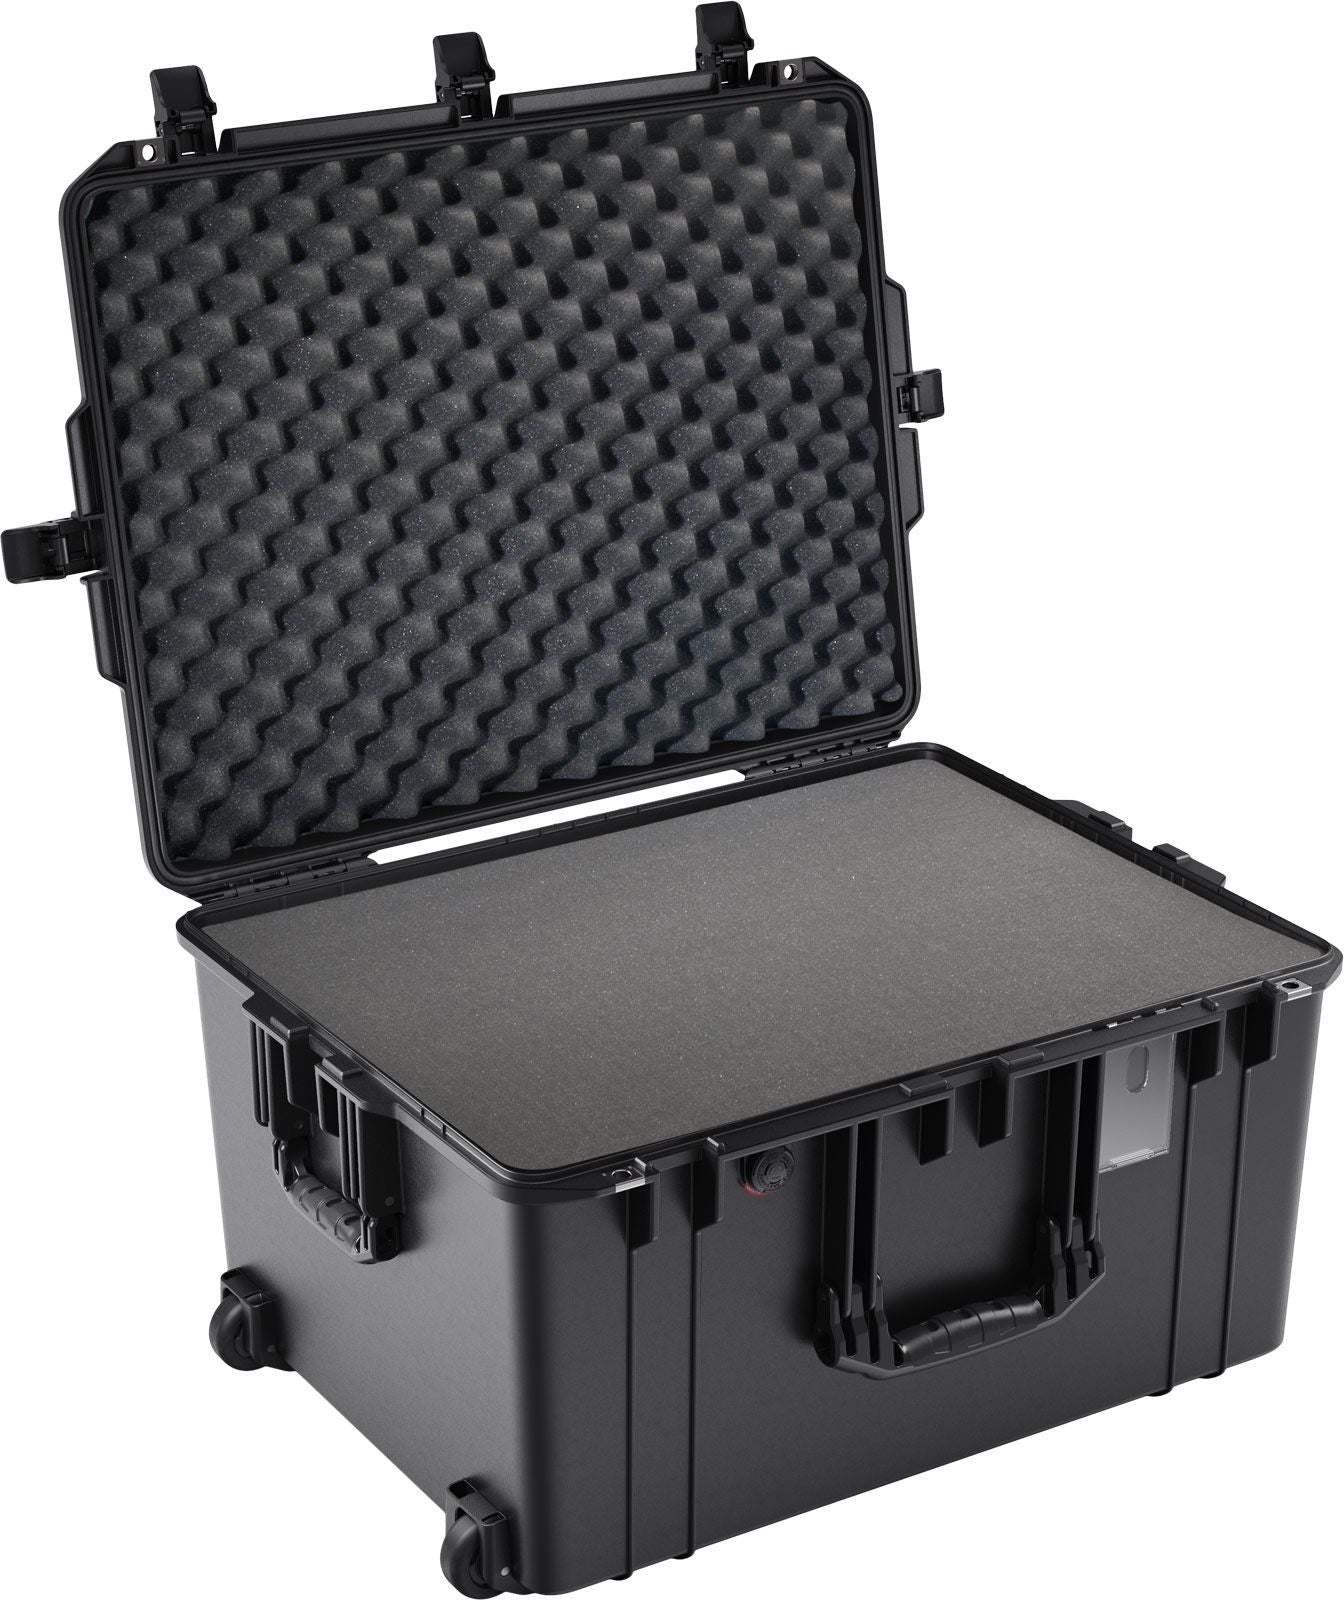 Pelican 1637 Wheeled Air Case with Foam -Limited Lifetime Local Warranty